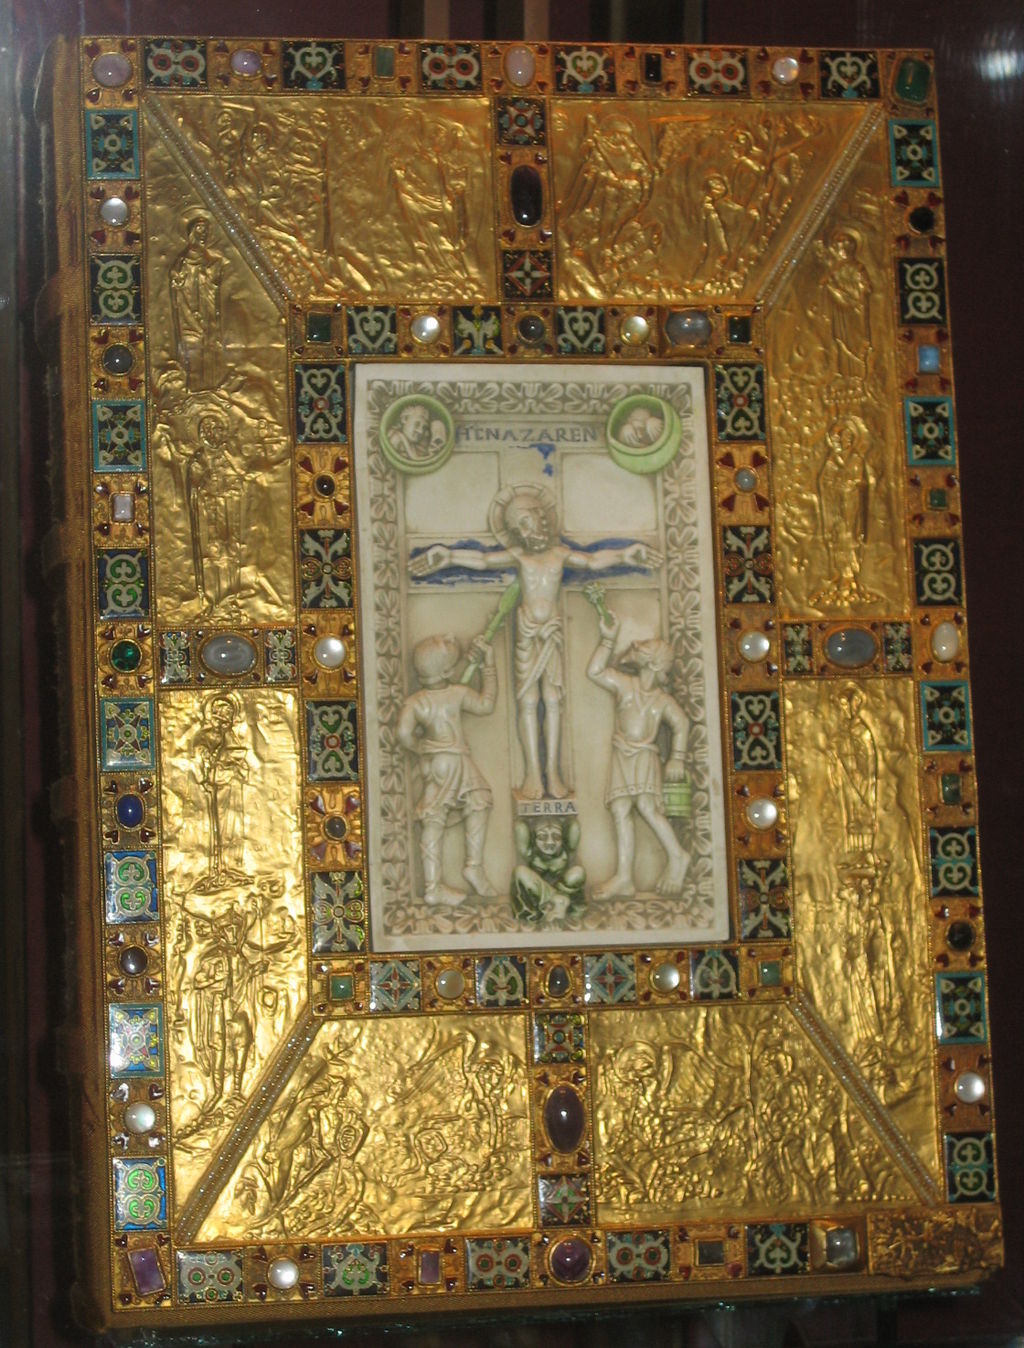 Codex Aureus abbey of Echternach: A large, rectangular art structure with religious imagery of Jesus in the center. Further, the background is in gold, while the center is depicted in a clean stone. 